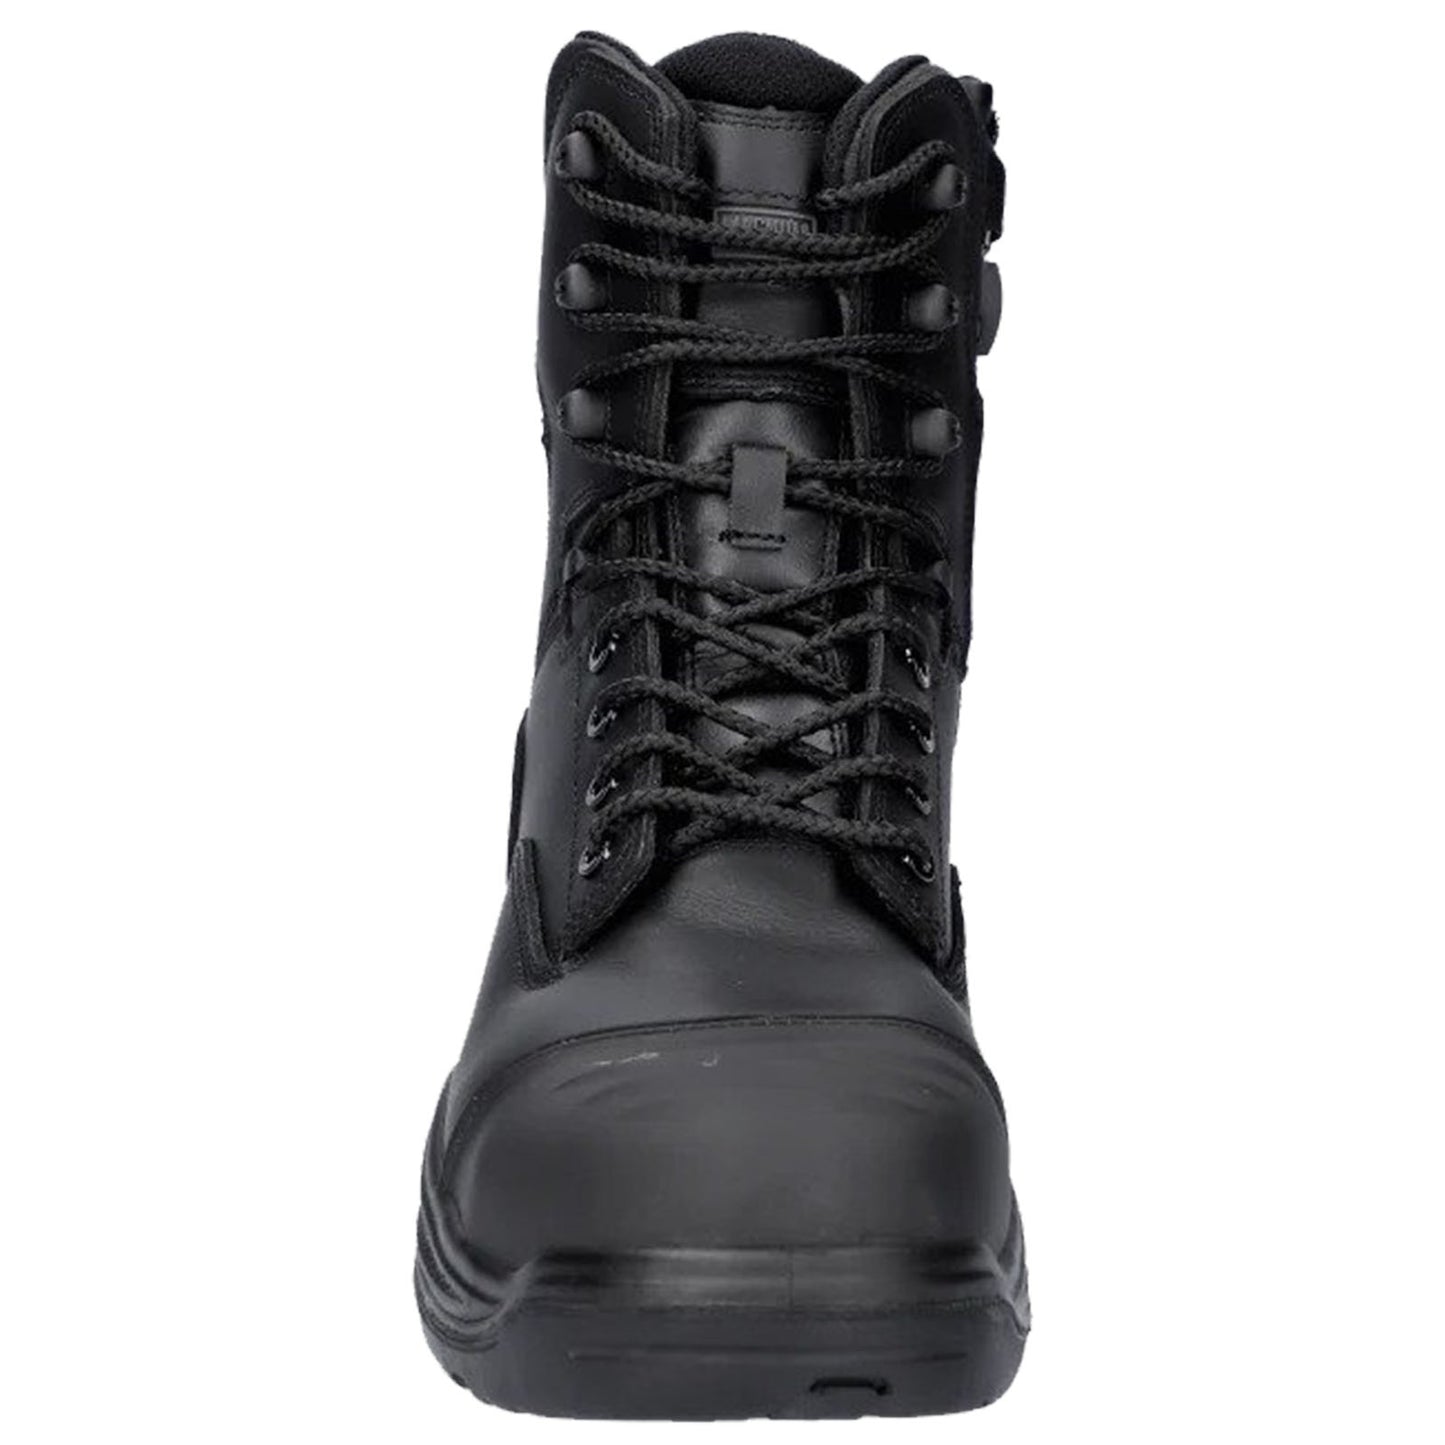 Magnum Unisex Rigmaster Side-Zip S3 Safety Boots